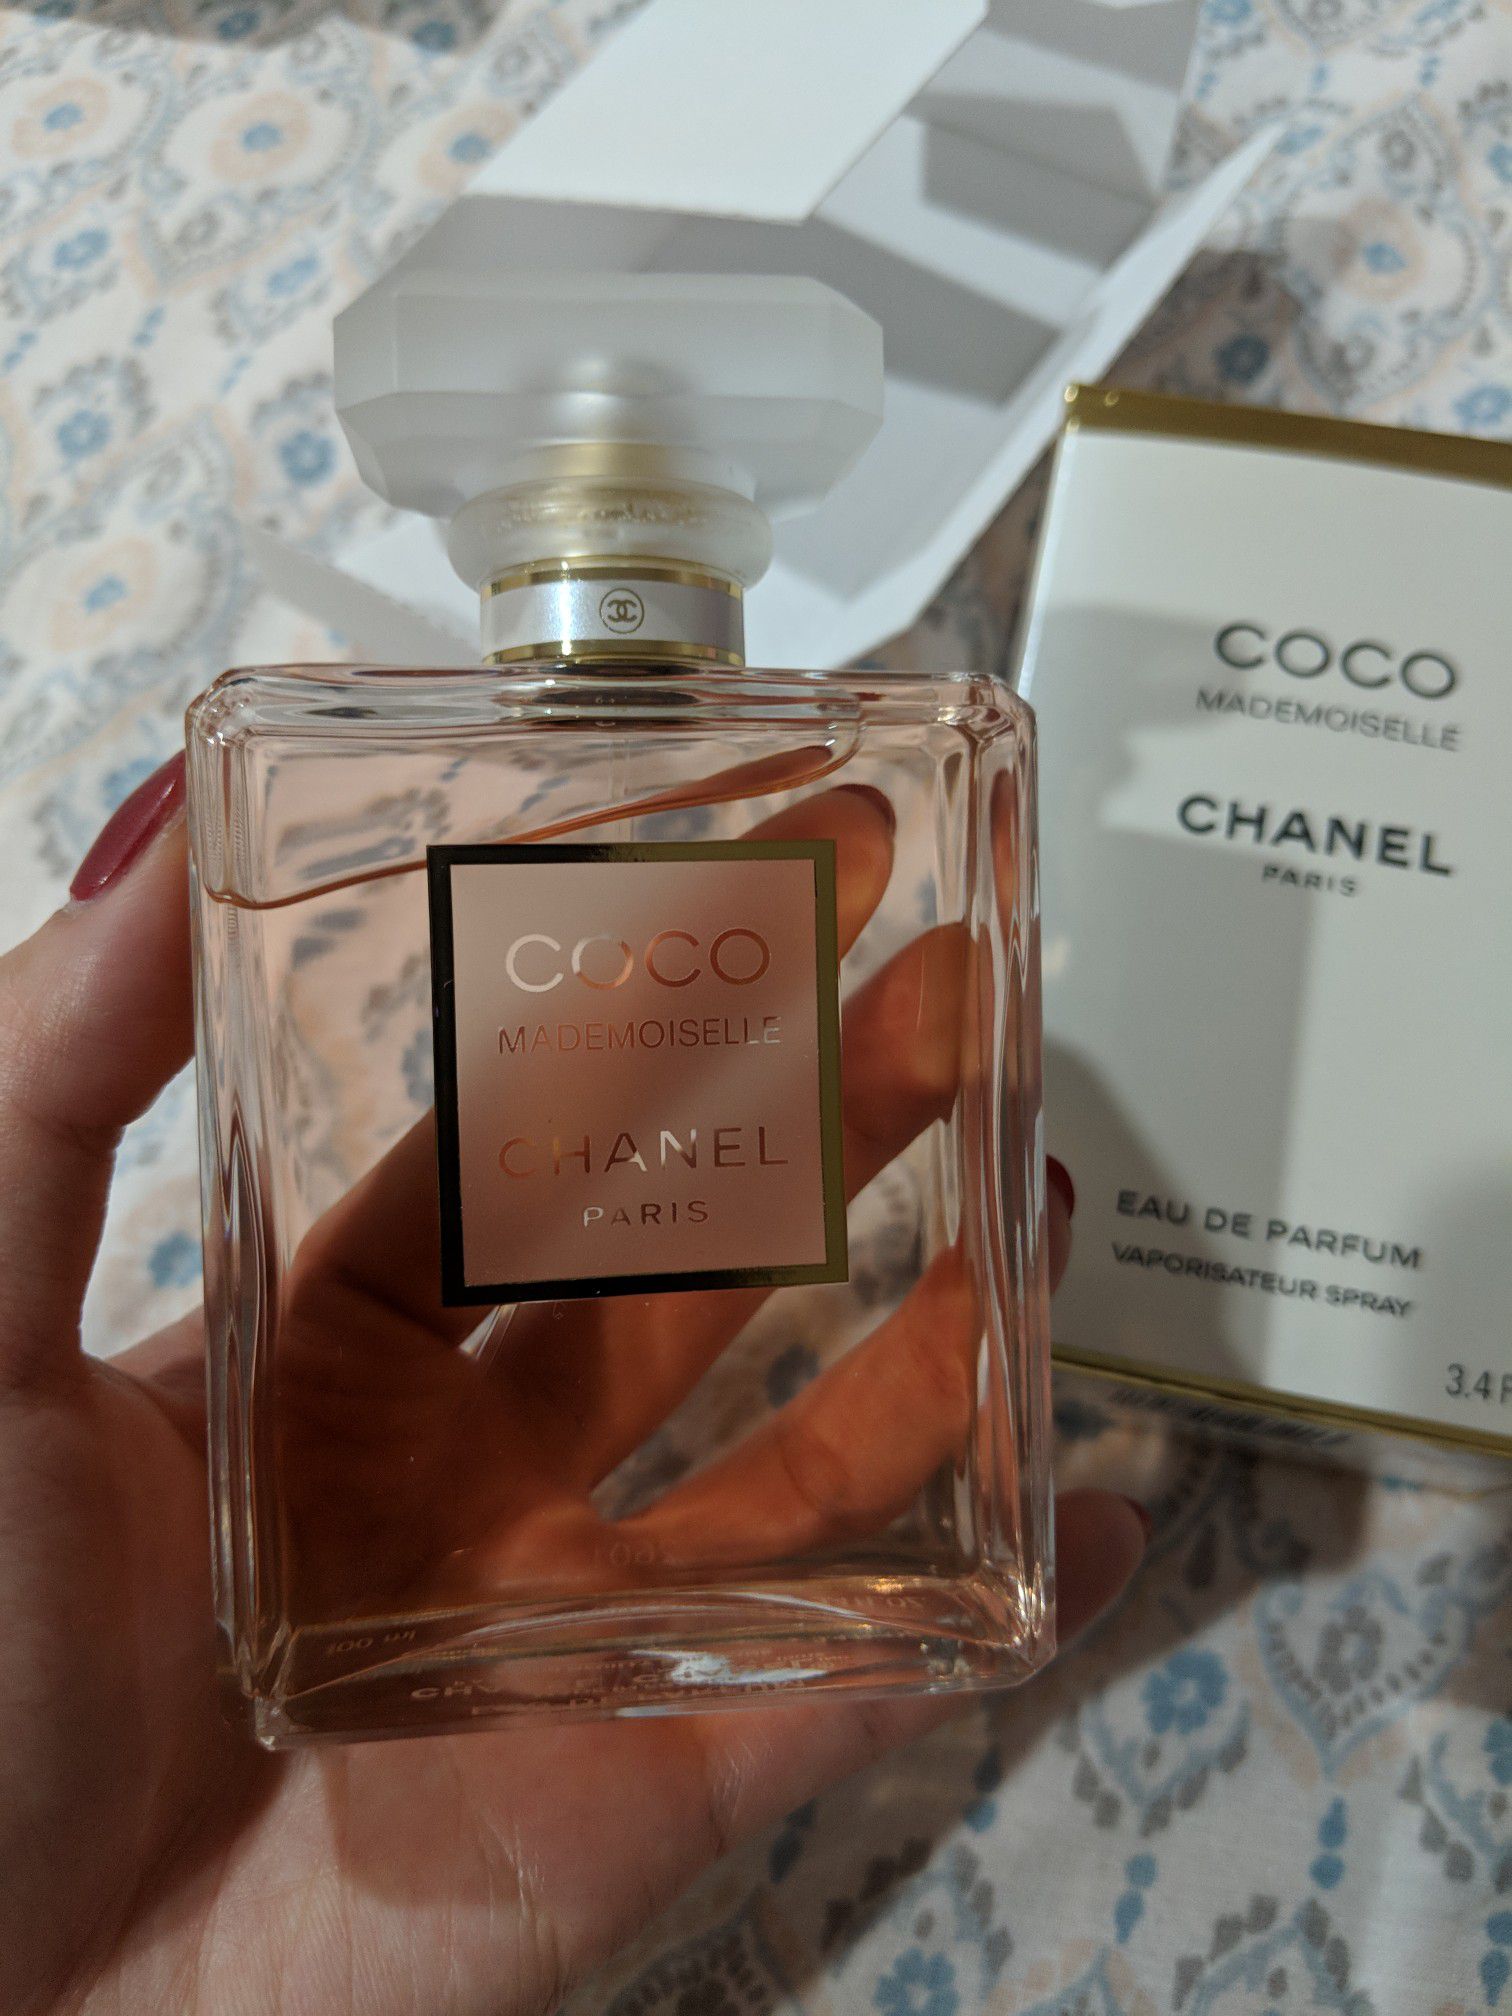 Chanel coco mademoiselle perfume for Sale in Anaheim, CA - OfferUp